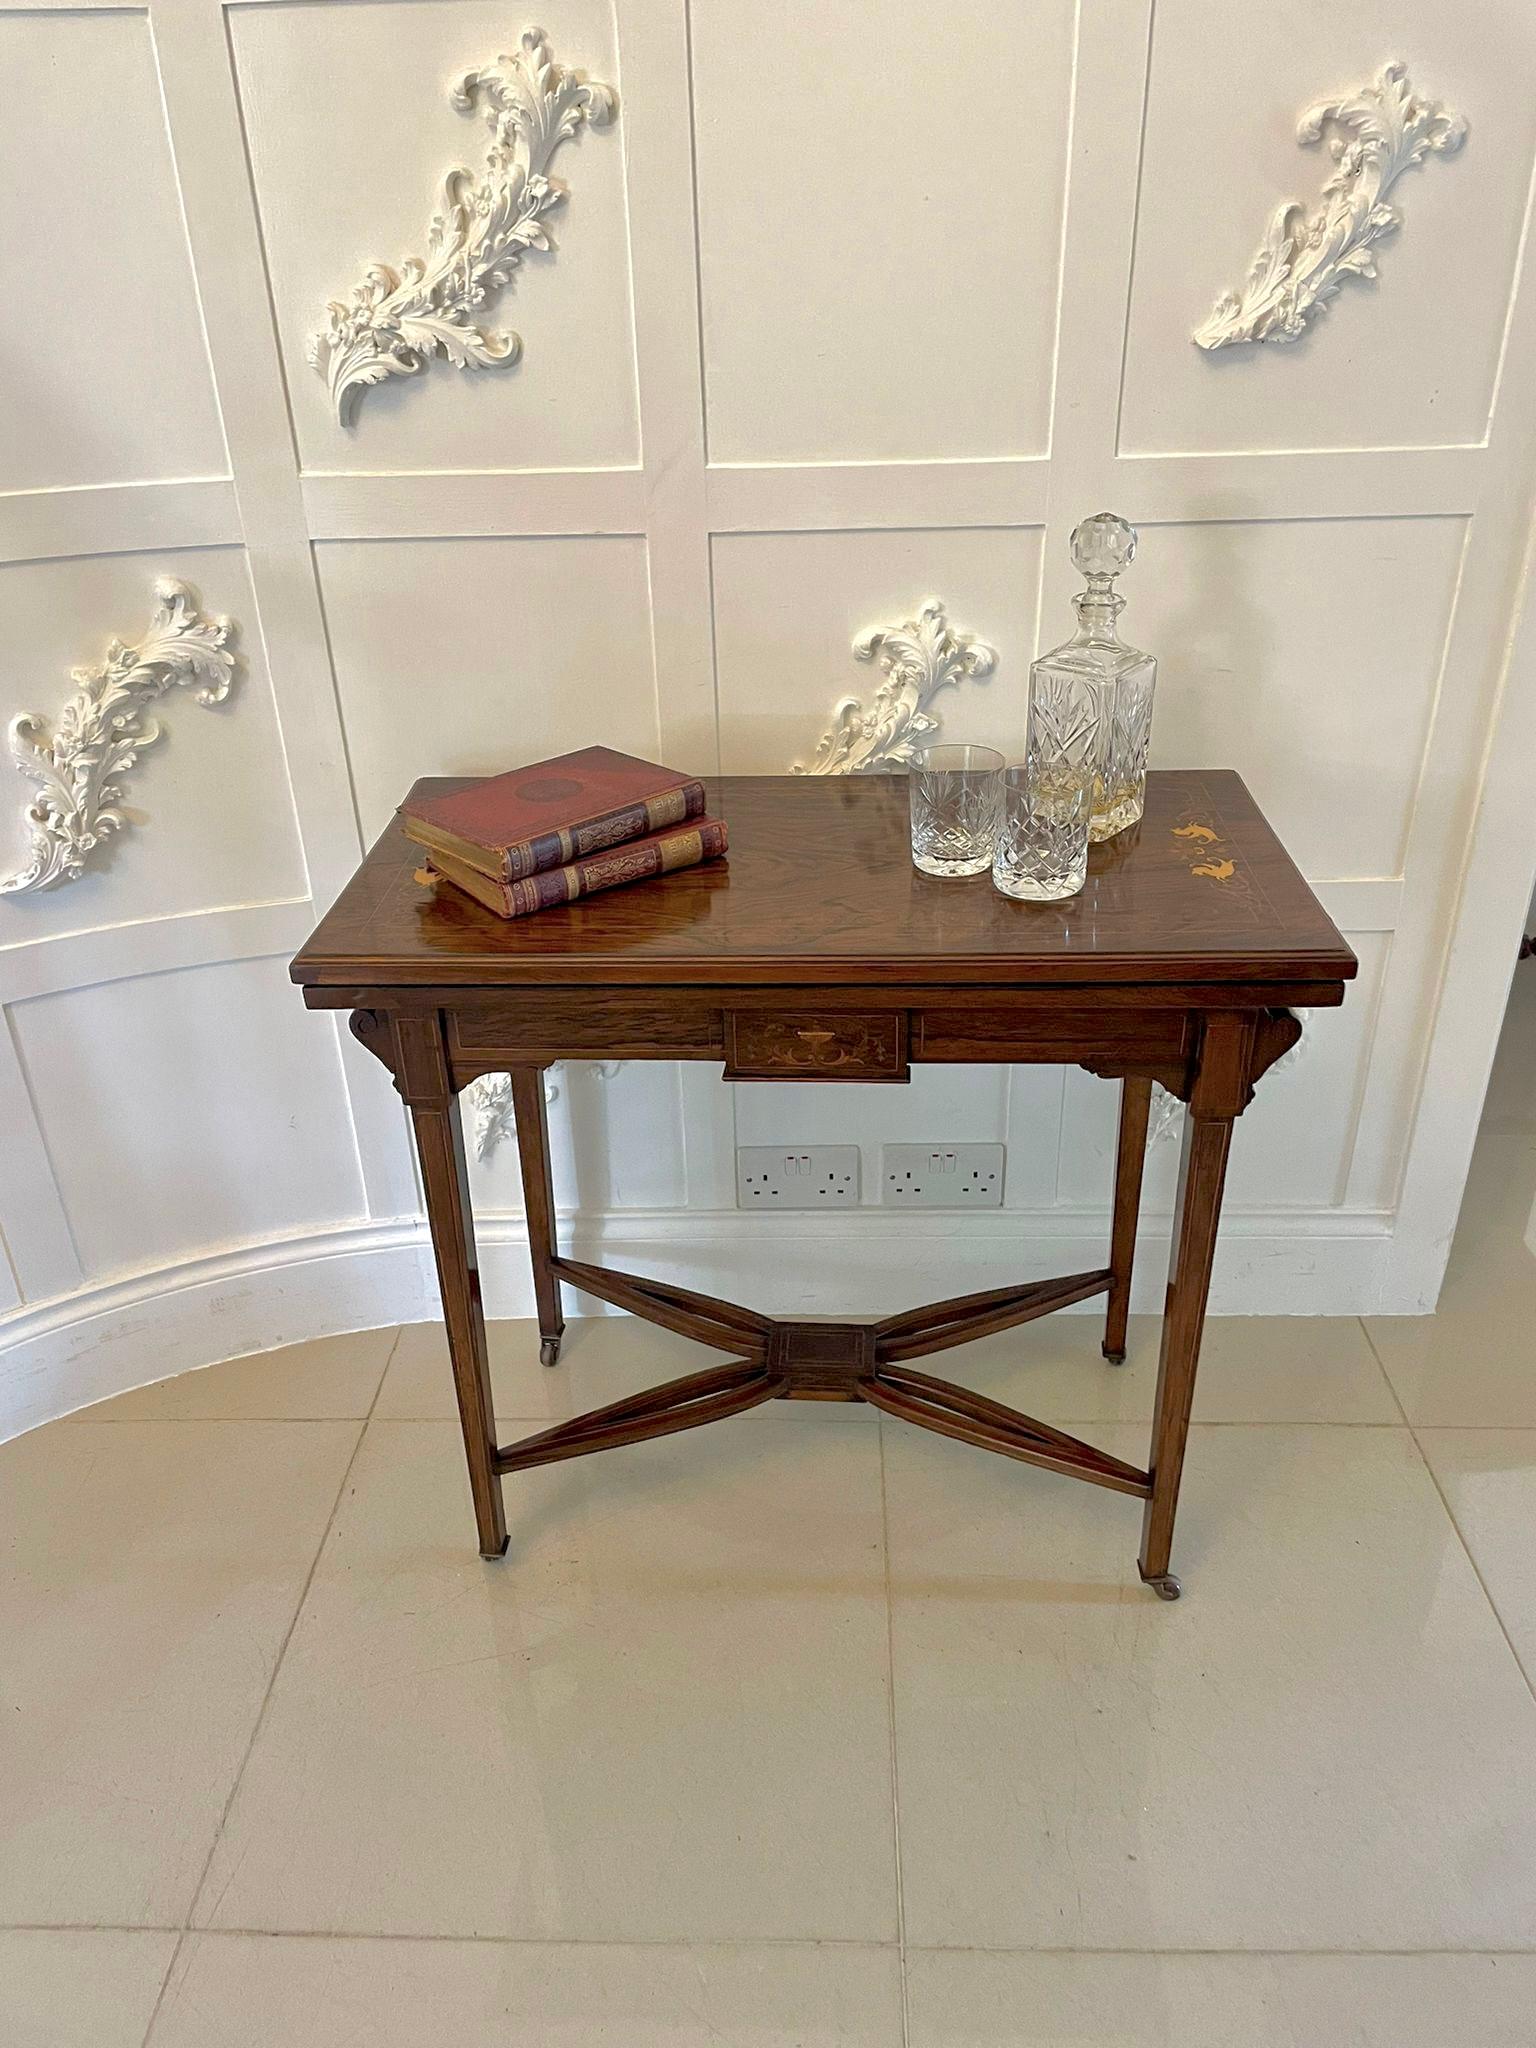 Antique Edwardian rosewood inlaid freestanding card table having a very attractive ivorine and satinwood inlay. The top swivels to reveal a green baize interior and it boasts a pretty inlaid frieze supported by four square inlaid tapering legs with